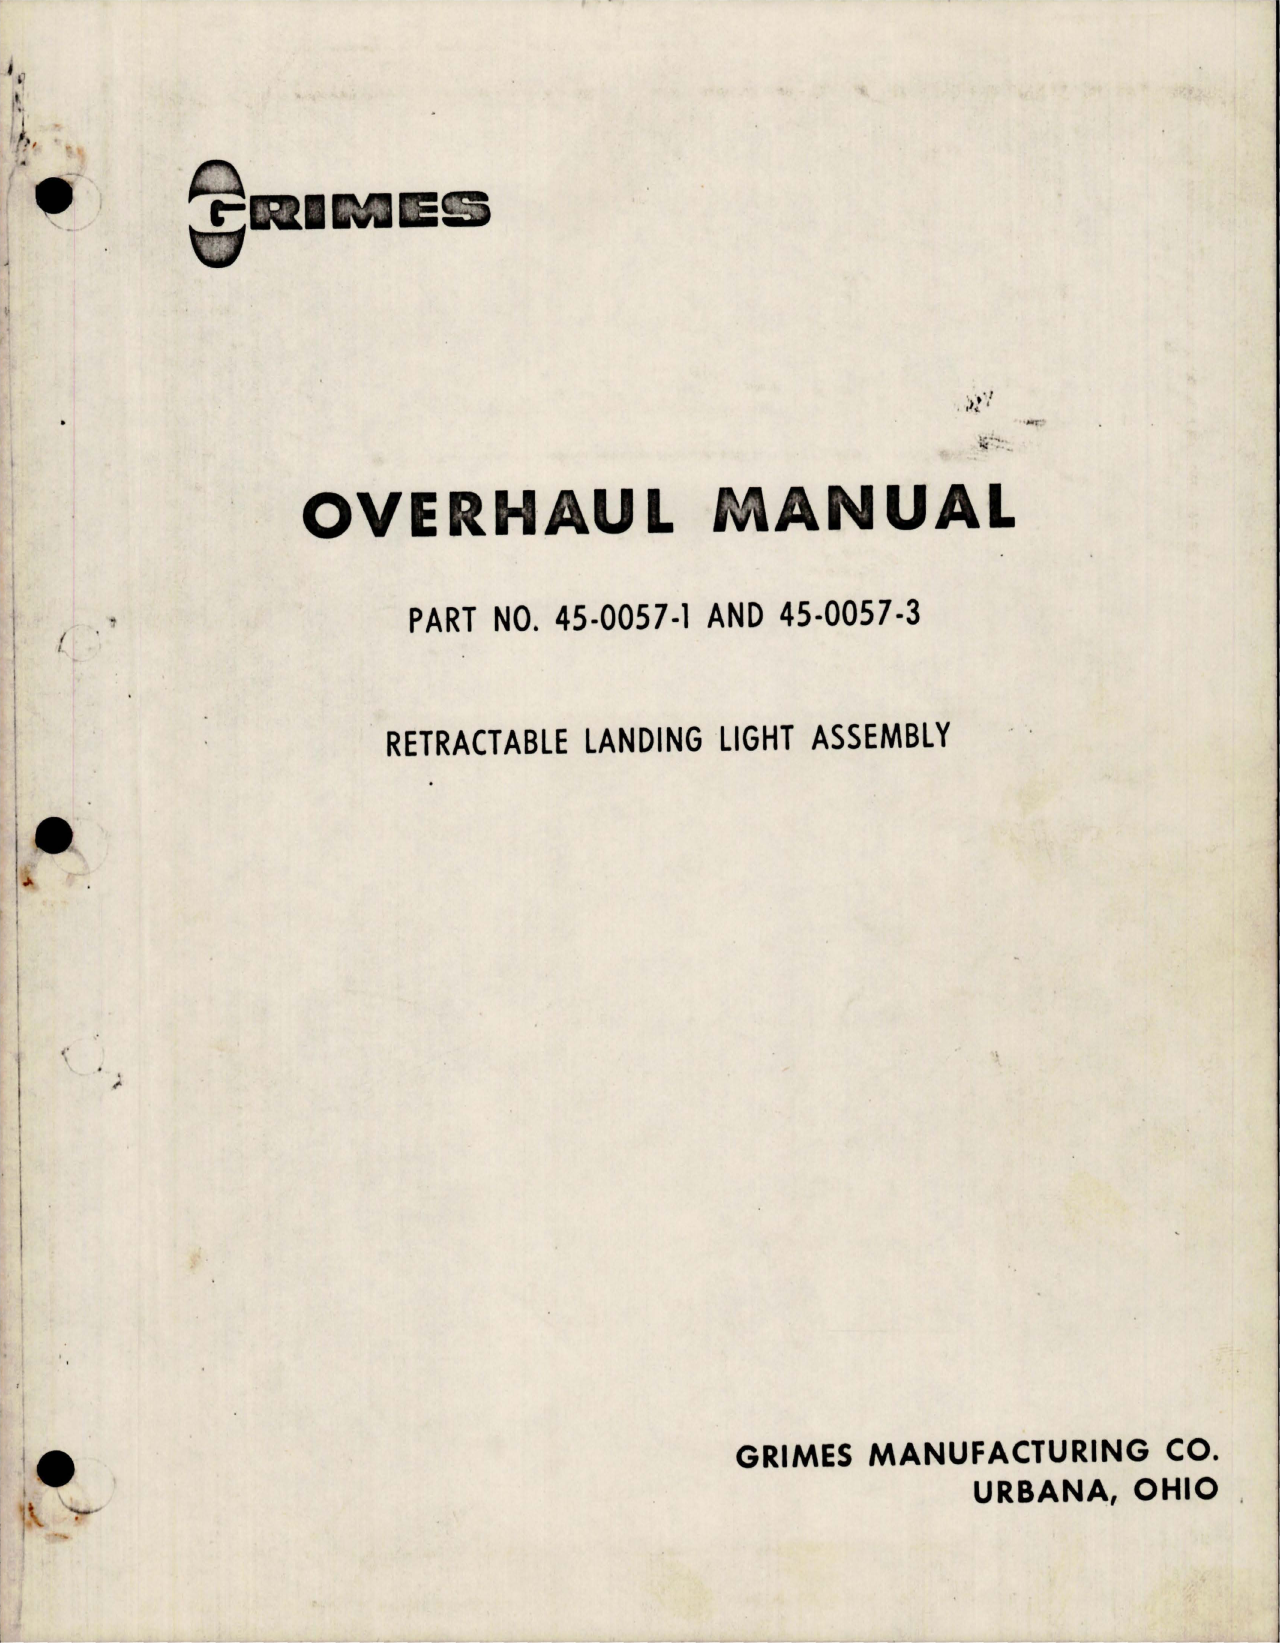 Sample page 1 from AirCorps Library document: Overhaul Manual for Retractable Landing Light Assembly - Parts 45-0057-1 and 45-0057-3